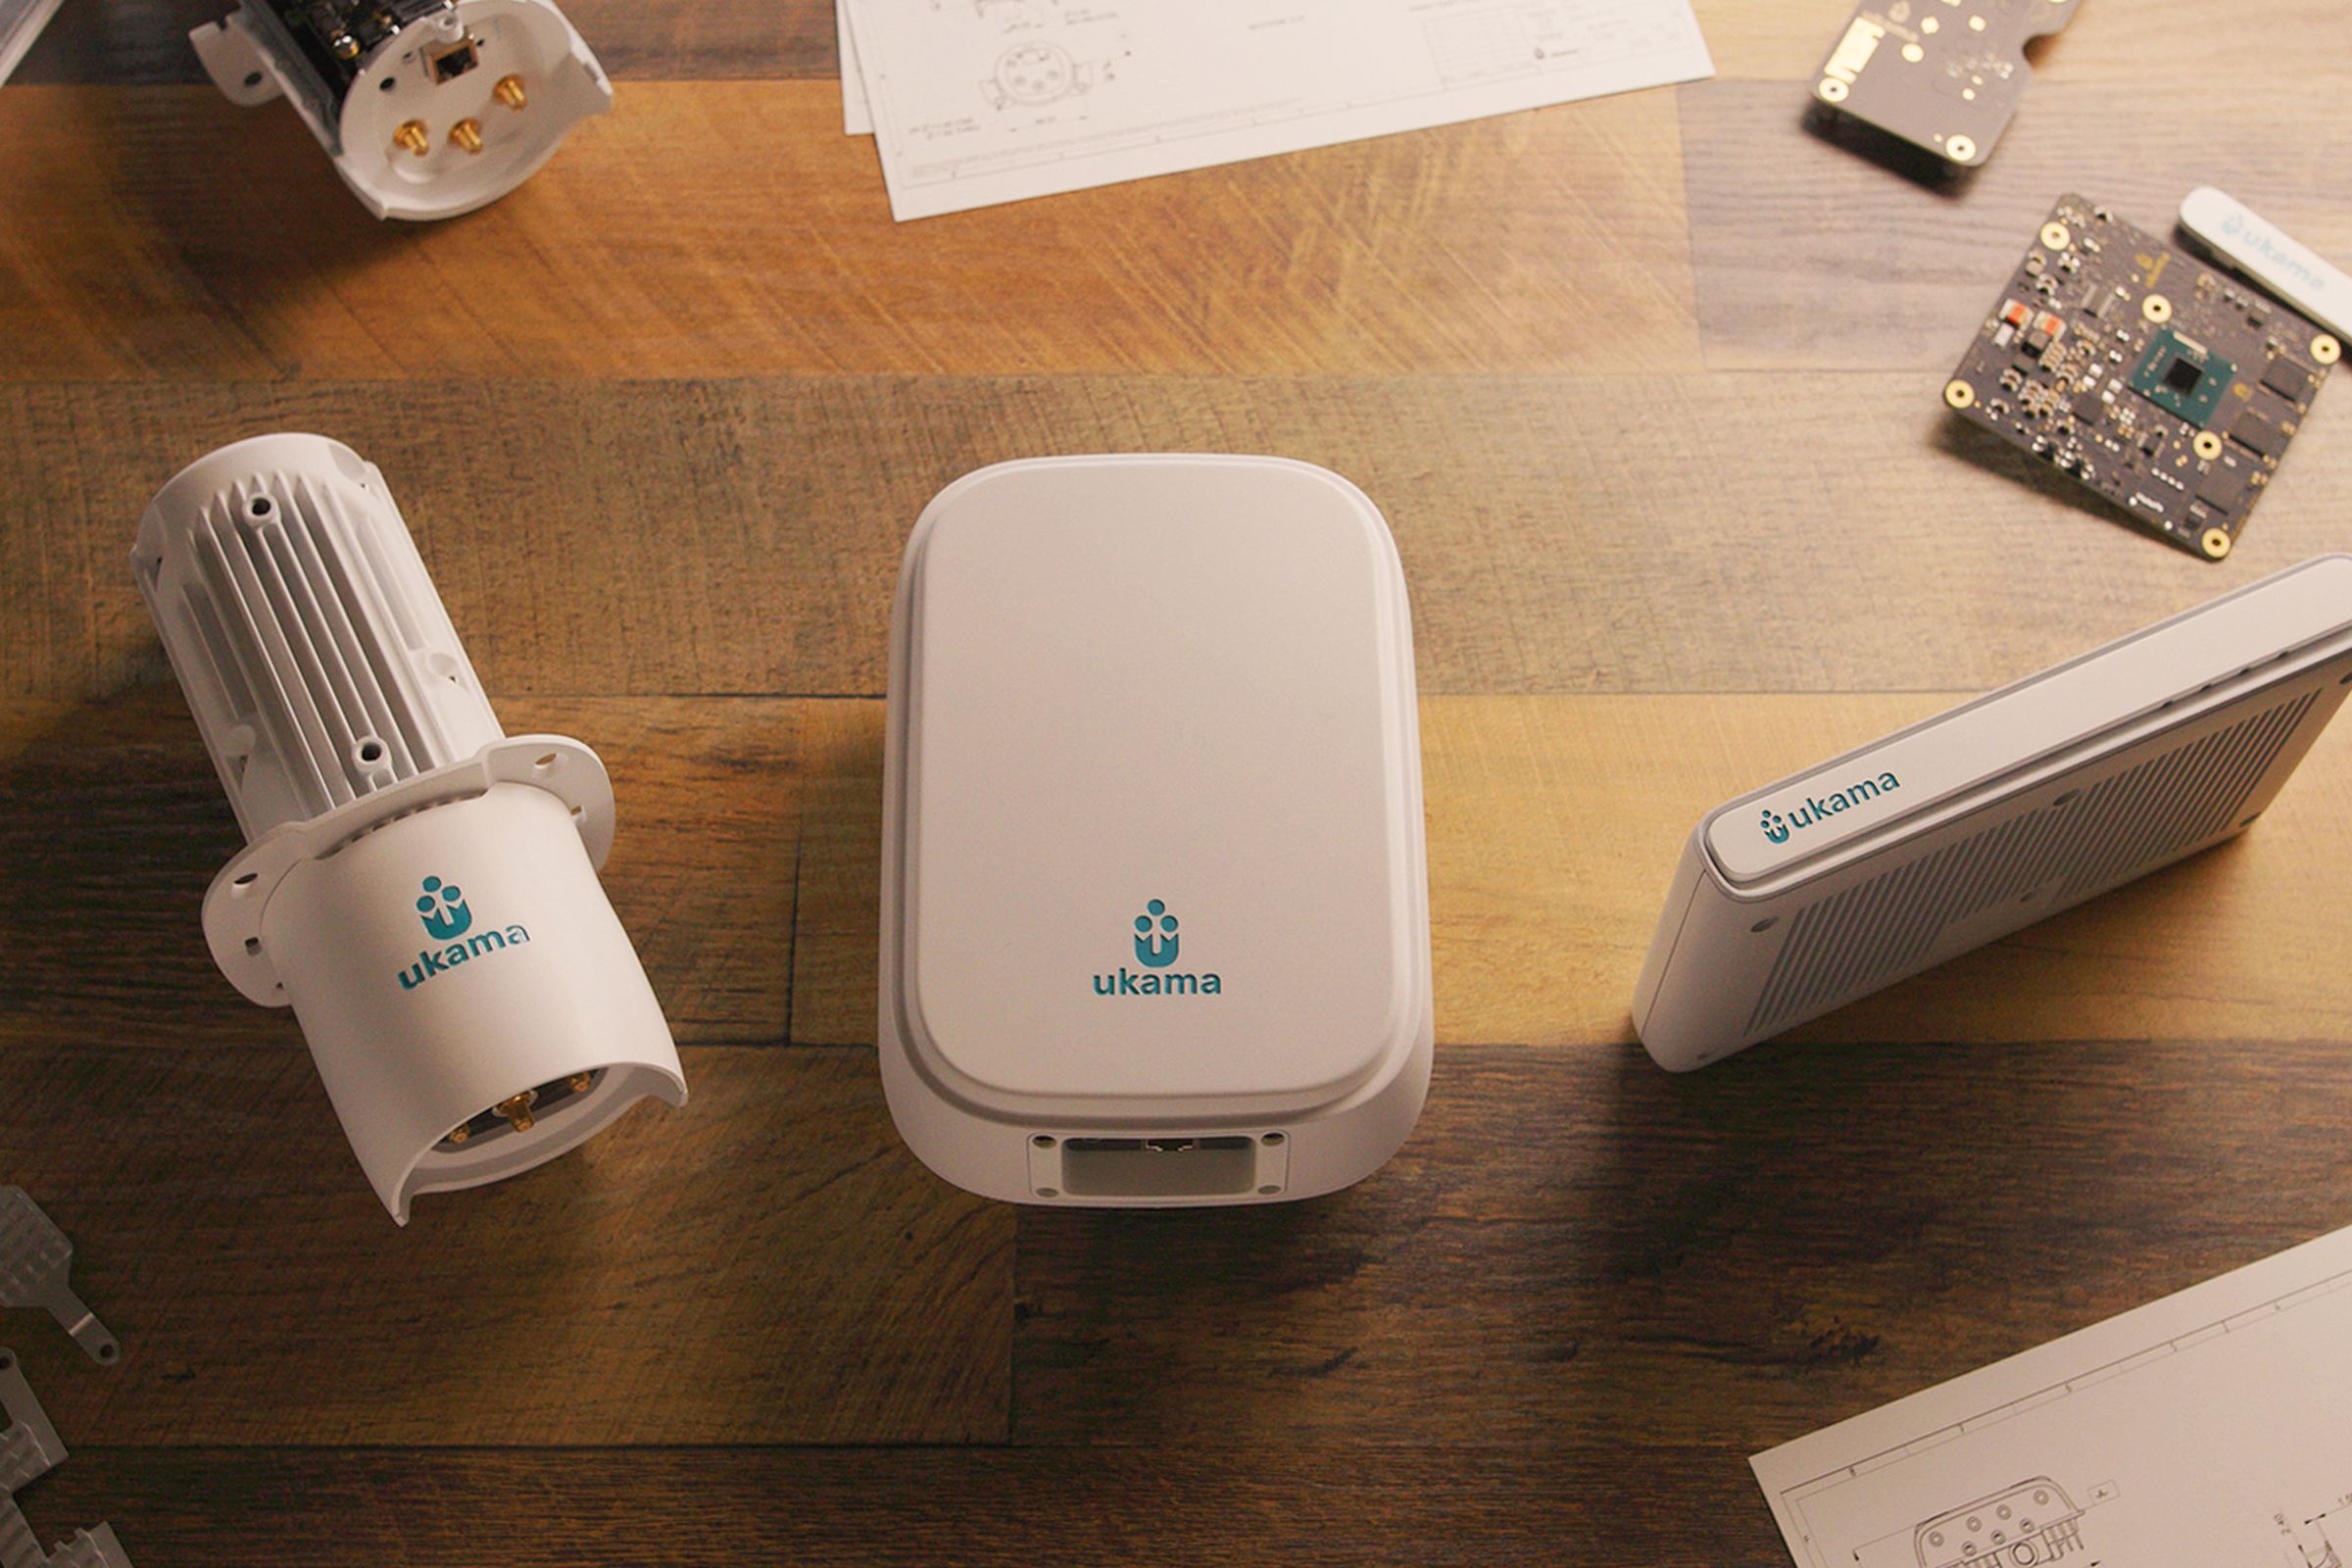 Image of several white plastic devices on a wood table — one somewhat cylindrical, one large rectangular one, and a small, book-like one.